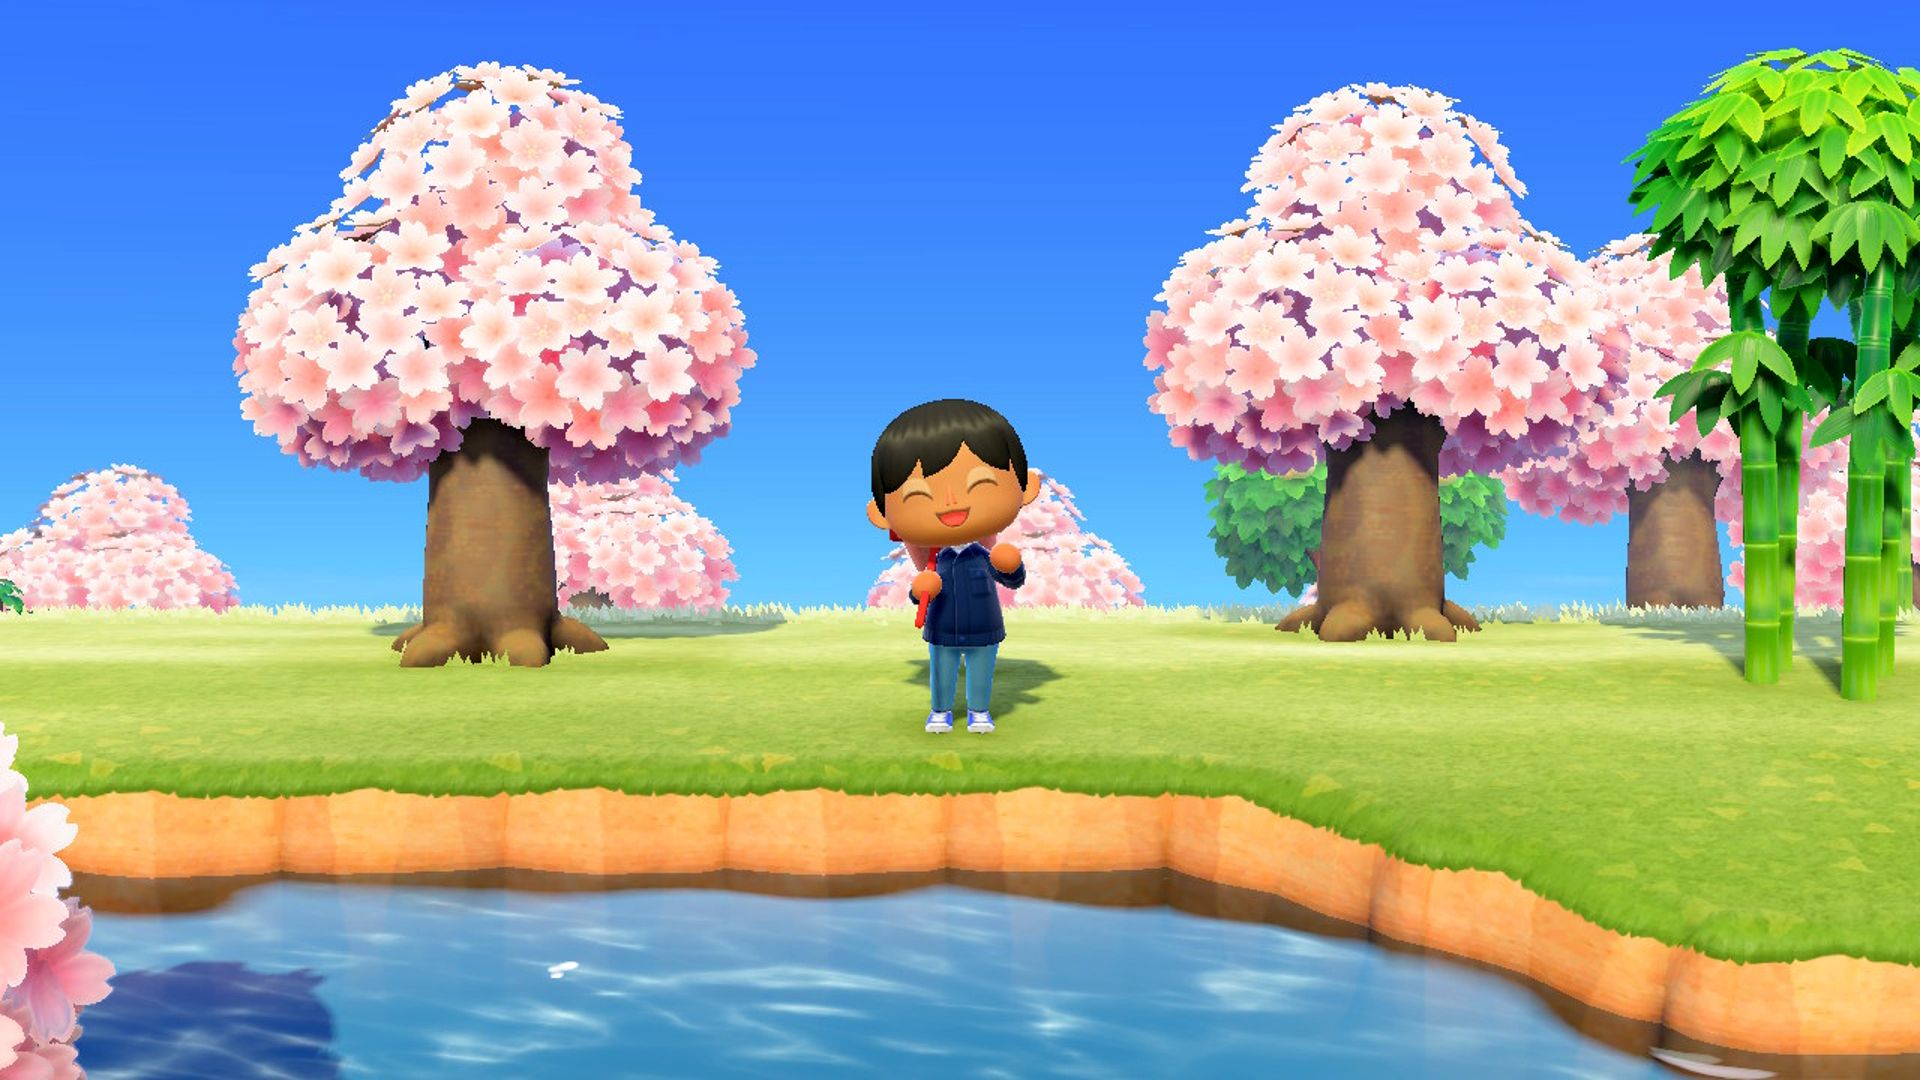 Male Player Smiling And Waving While Standing Near Cherry Blossom Trees And River In Animal Crossing New Horizons